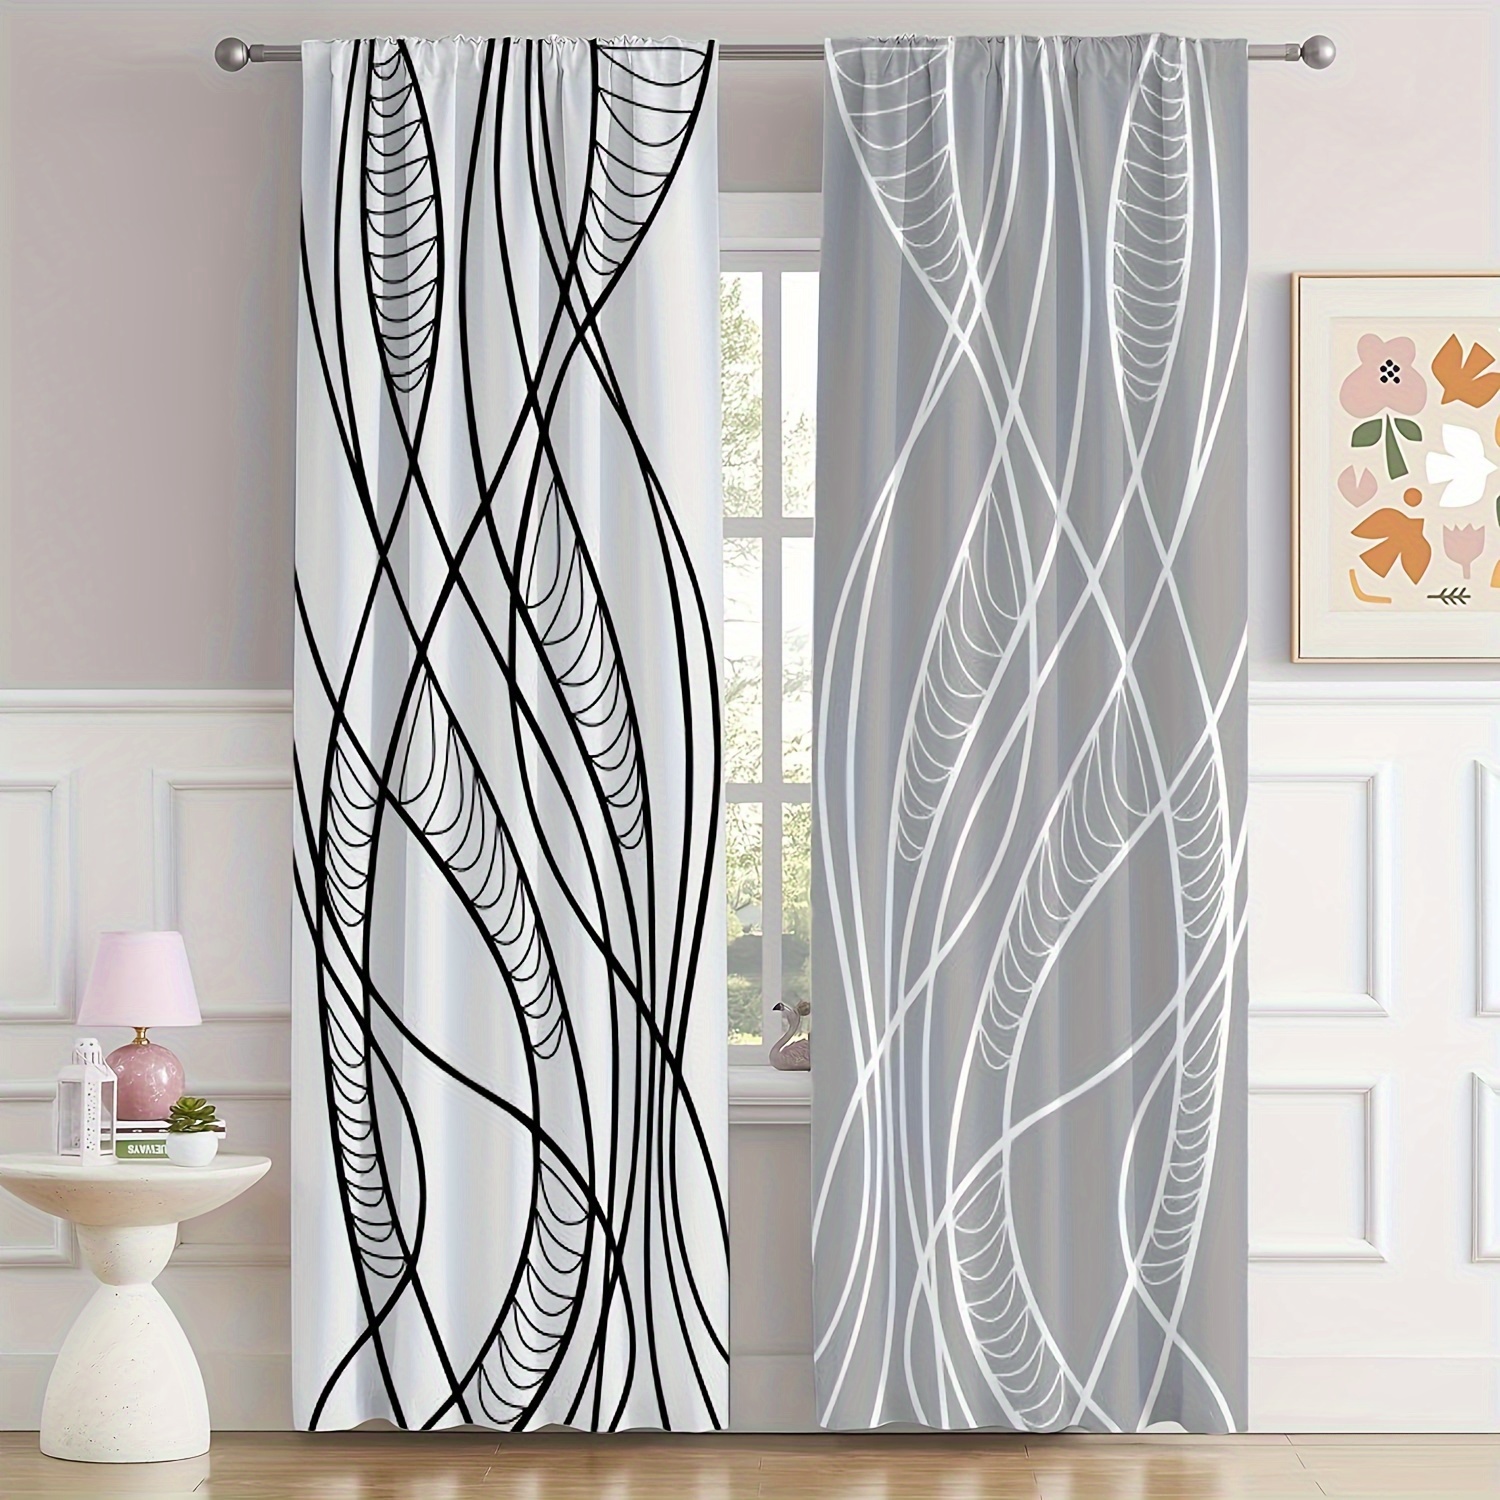 

2pcs/set, Artistic Style Pattern Printed Blackout Curtains, Machine Washable, Artistic Decor For Bedroom & Living Room, Room Decor, Home Decor